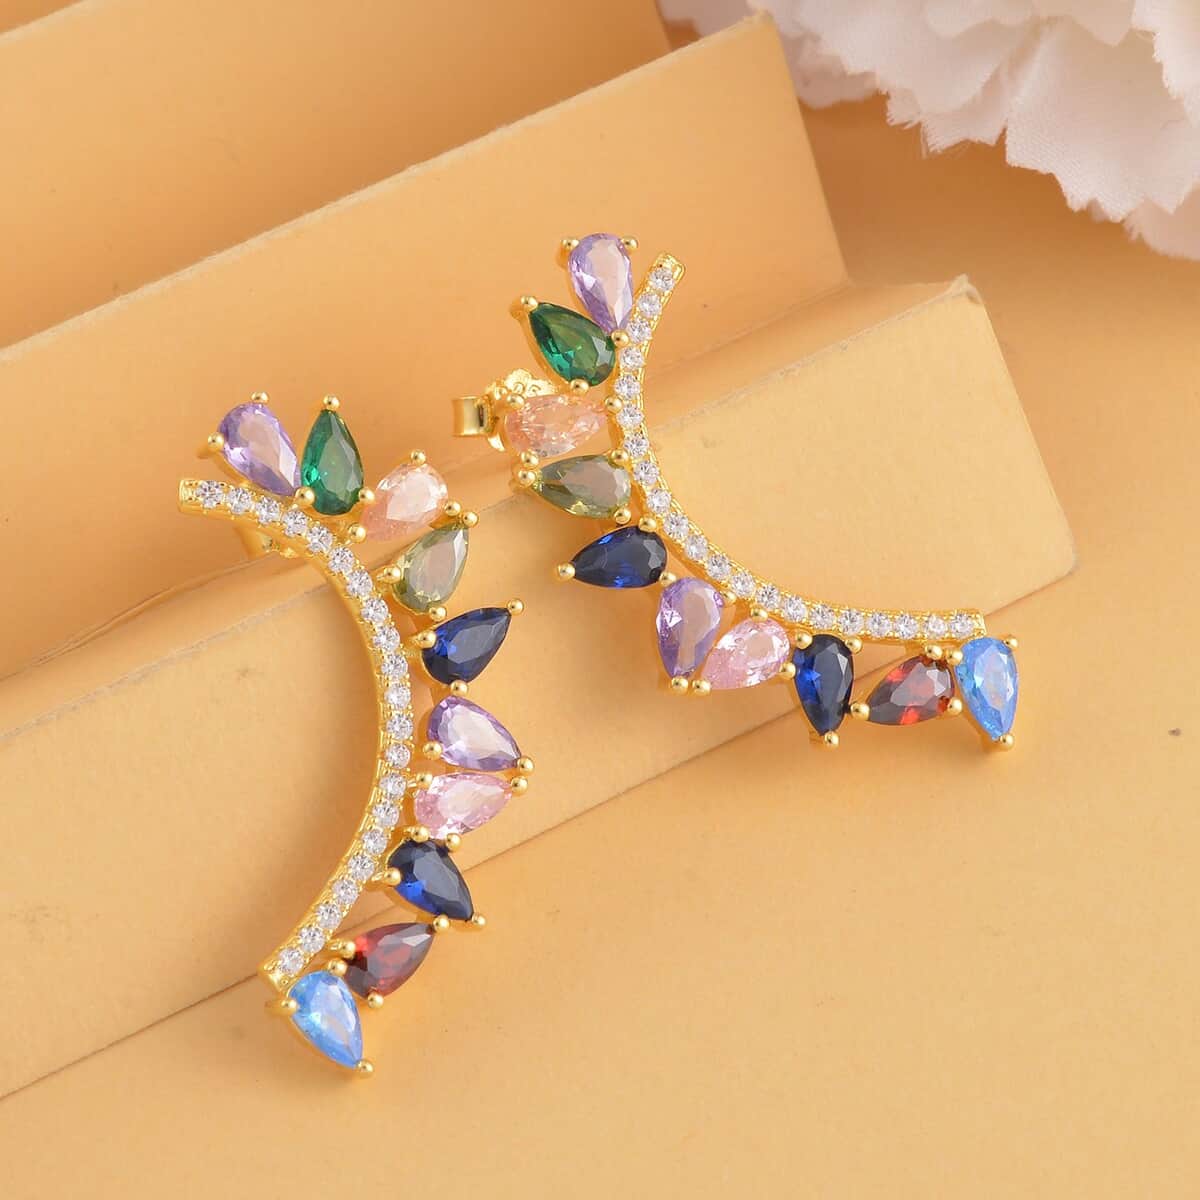 Buy Simulated Multi Color Diamond Earrings in 14K Yellow Gold Over ...